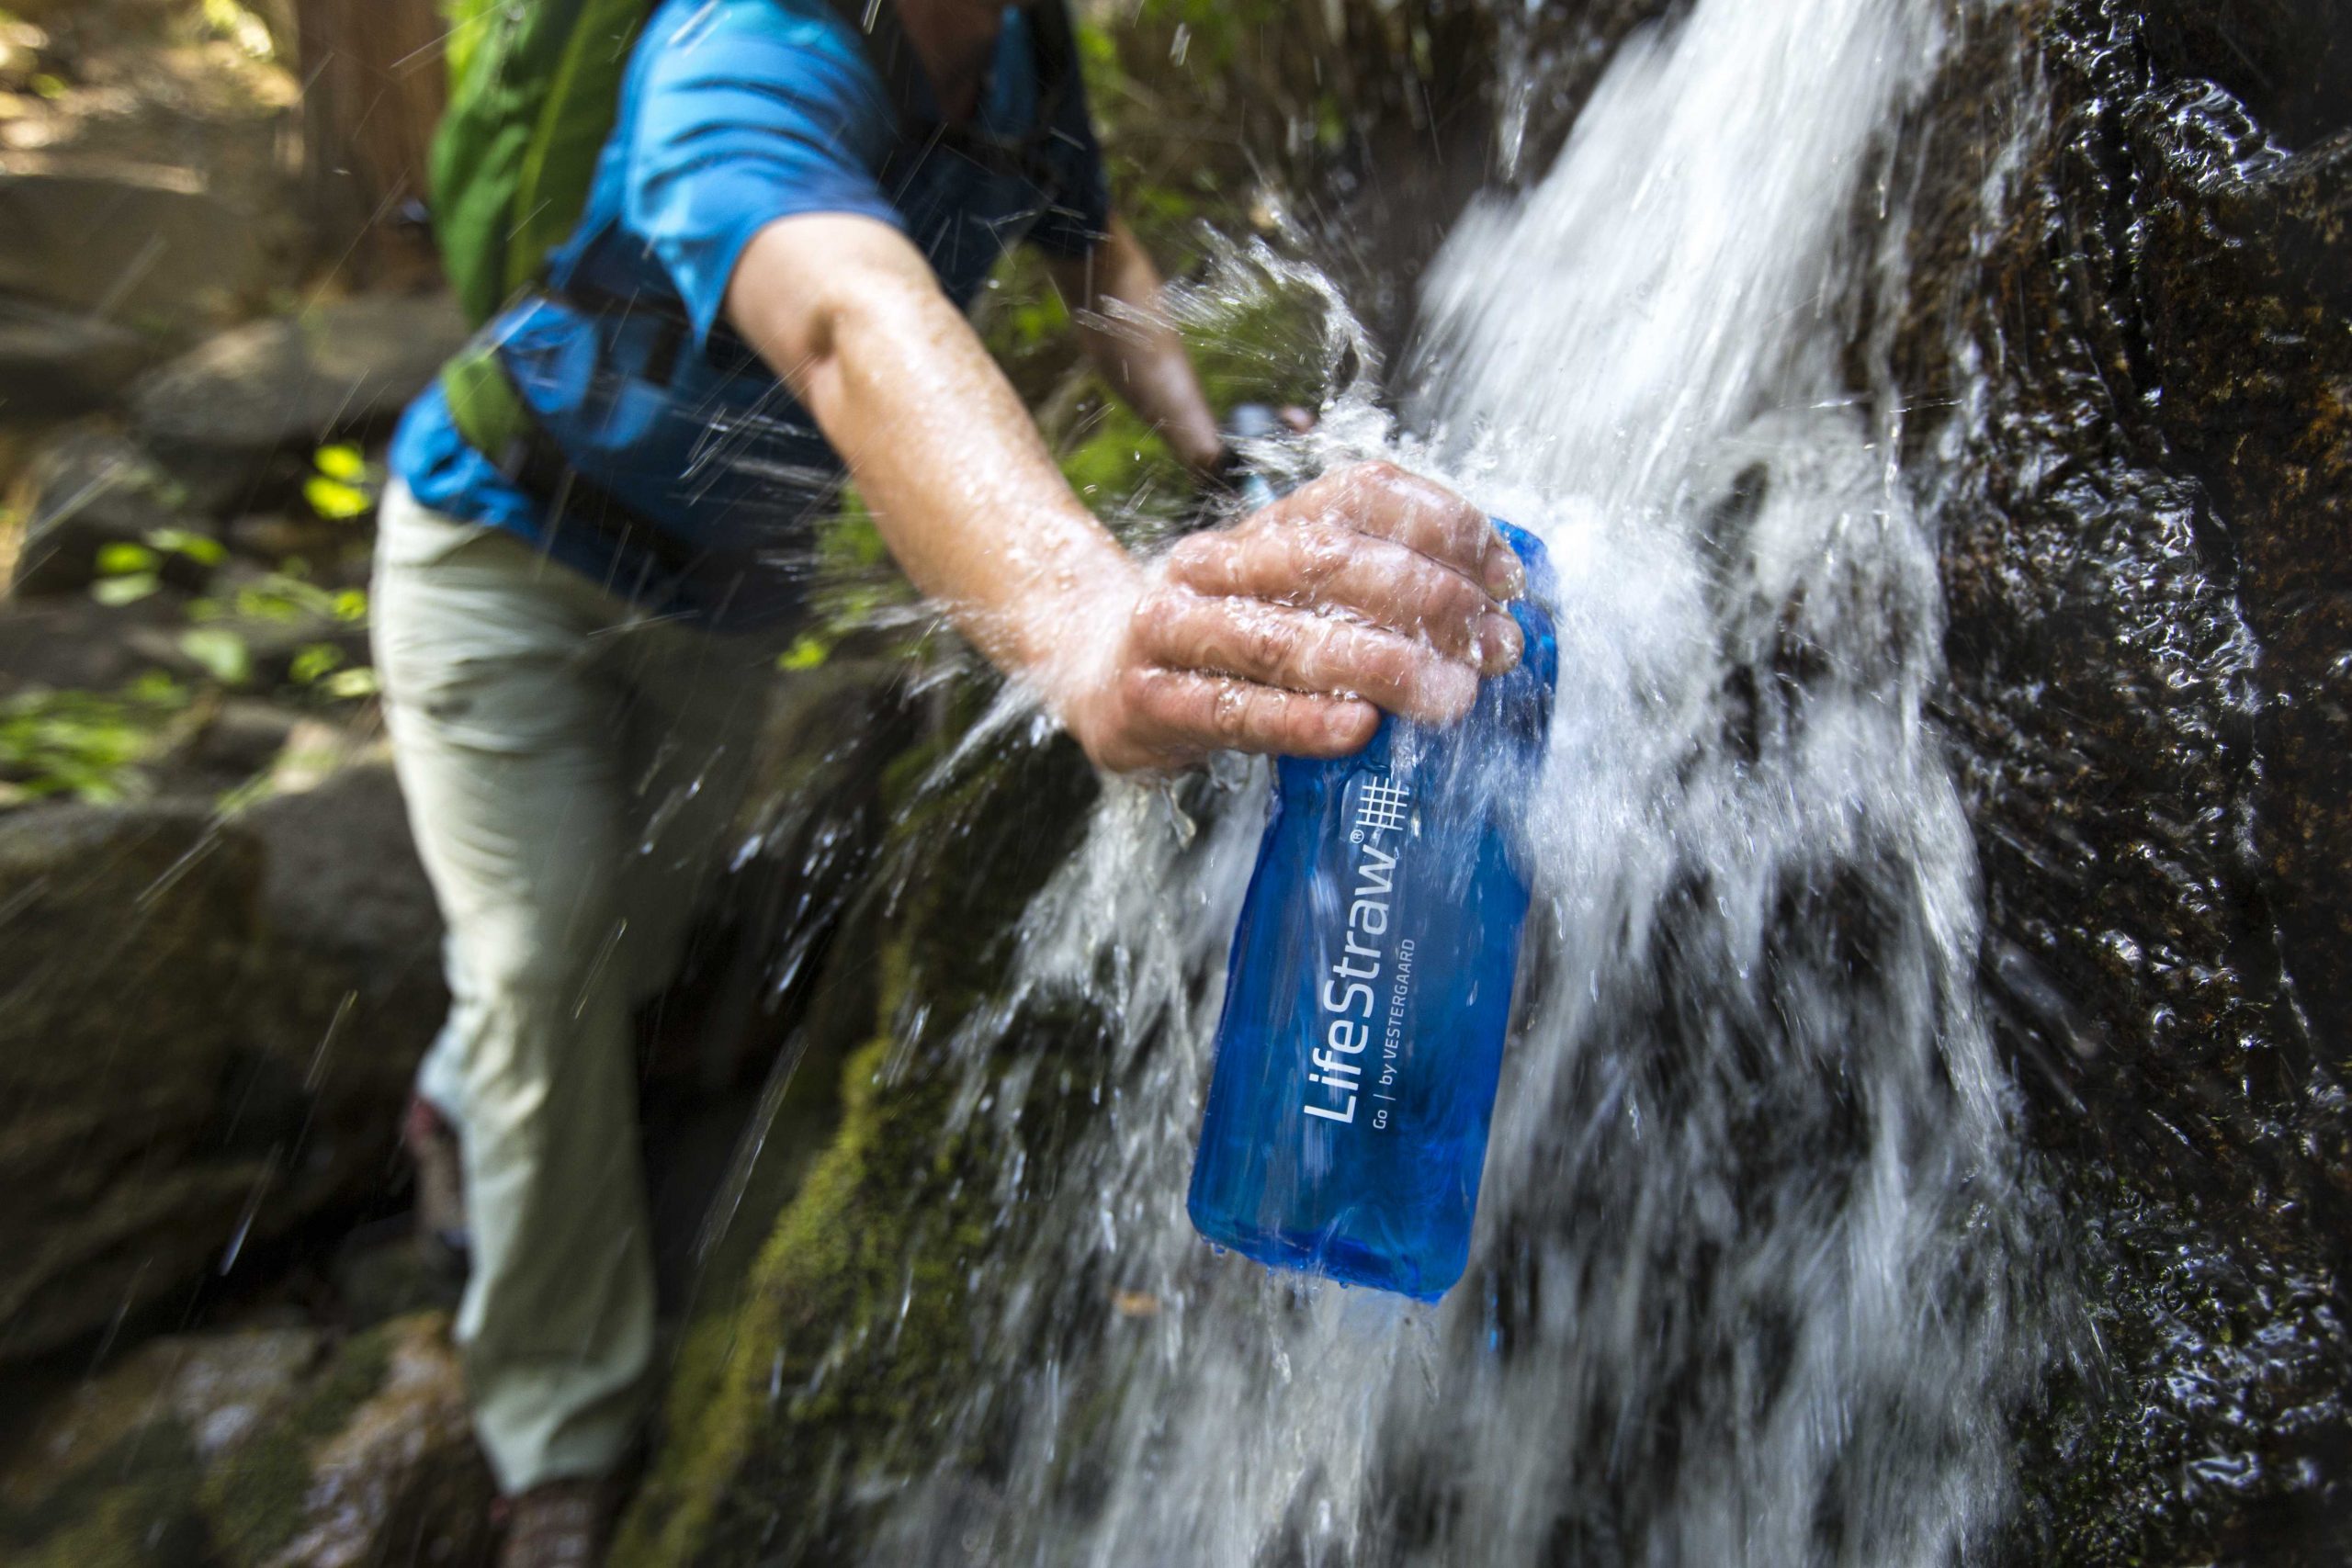 LifeStraw Delivers Clean Drinking Water to Children in Developing